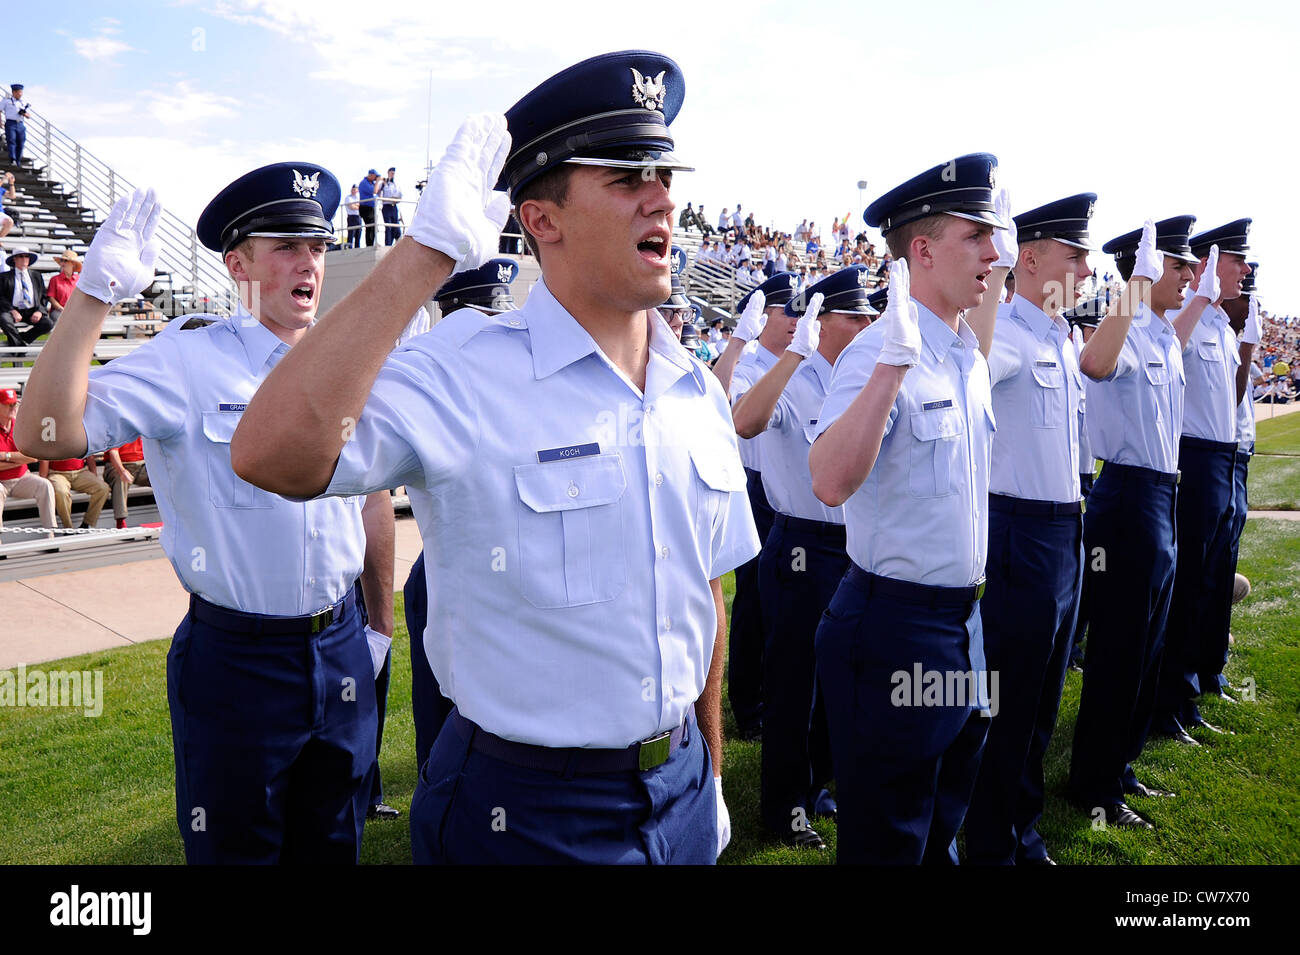 Basic cadet Jared Koch recites the Honor Oath during the Class of 2016 Acceptance Parade on the U.S. Air Force Academy's Stillman Parade Field in Colorado Springs, Colo. Aug 7, 2012. During Acceptance, the new freshmen march toward the Cadet Wing in an inverse wedge formation to signify their entrance into the Cadet Wing. Stock Photo